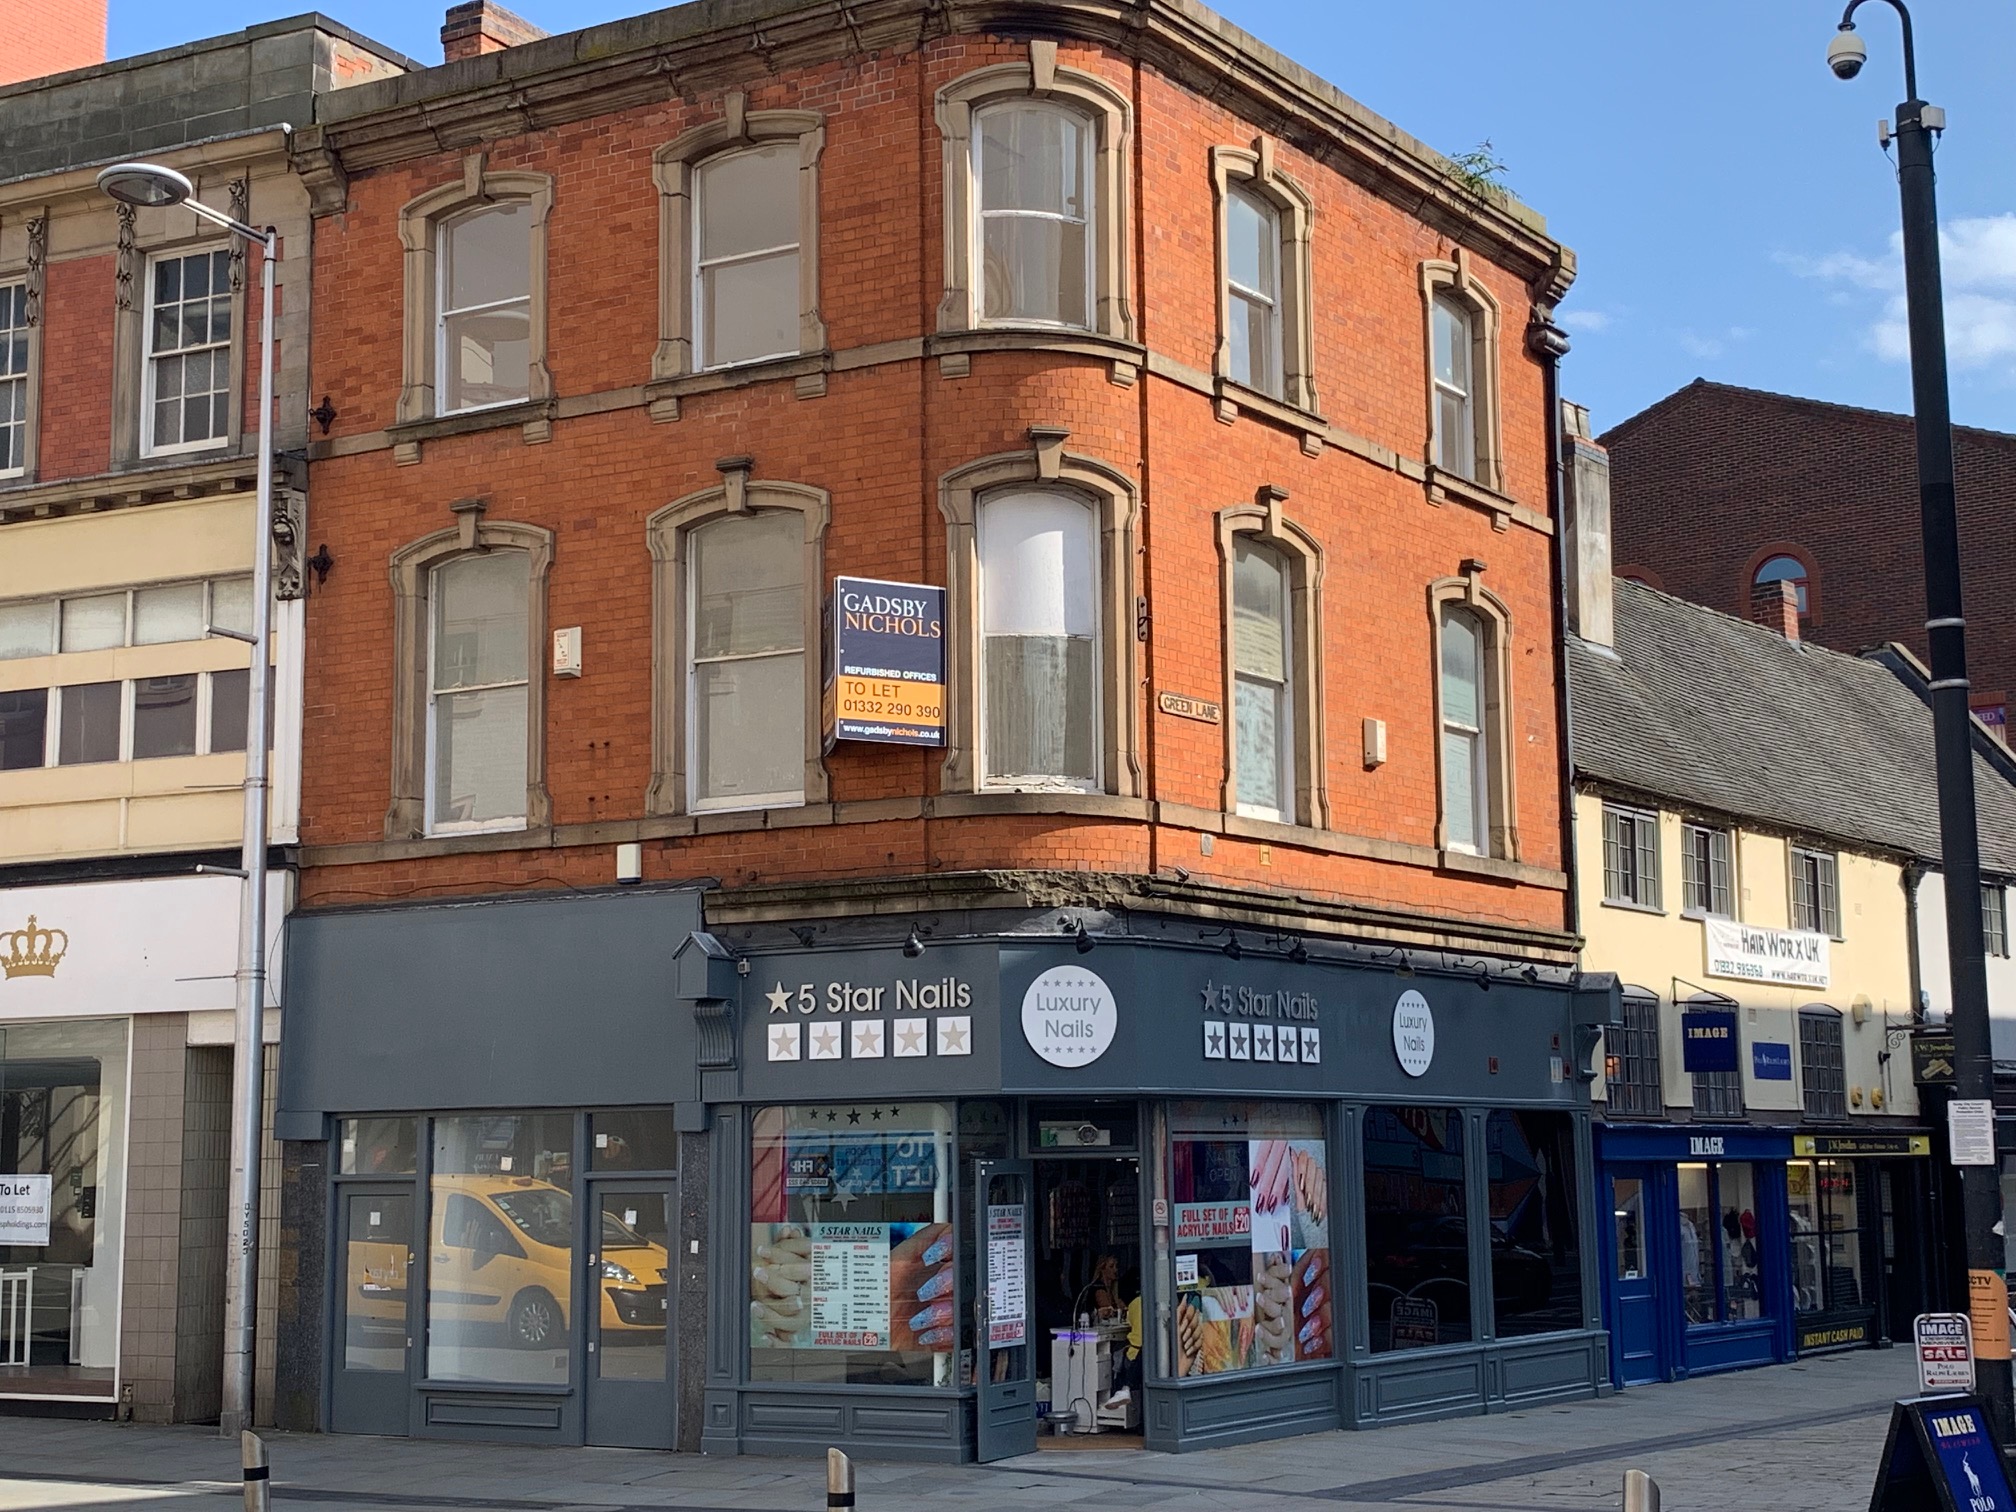 0 bed Office for rent in Derby. From Gadsby Nichols - Derby